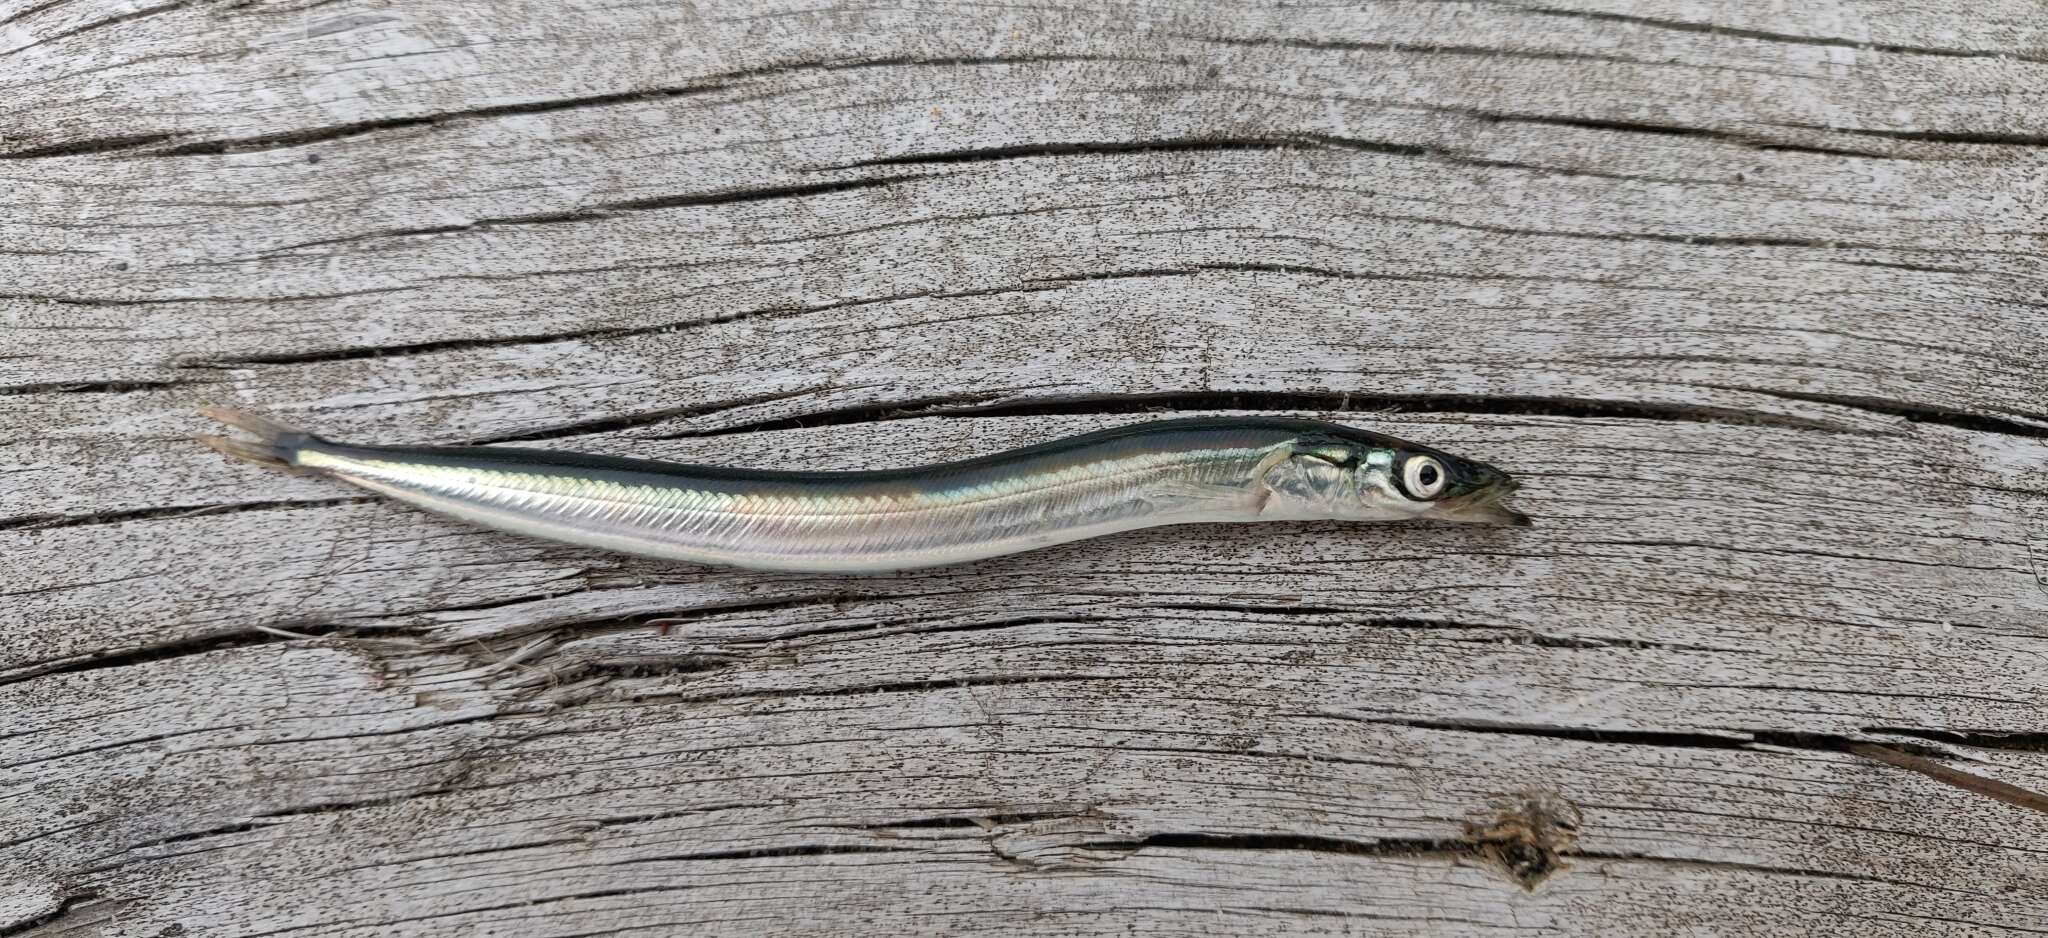 Image of Pacific sand lance